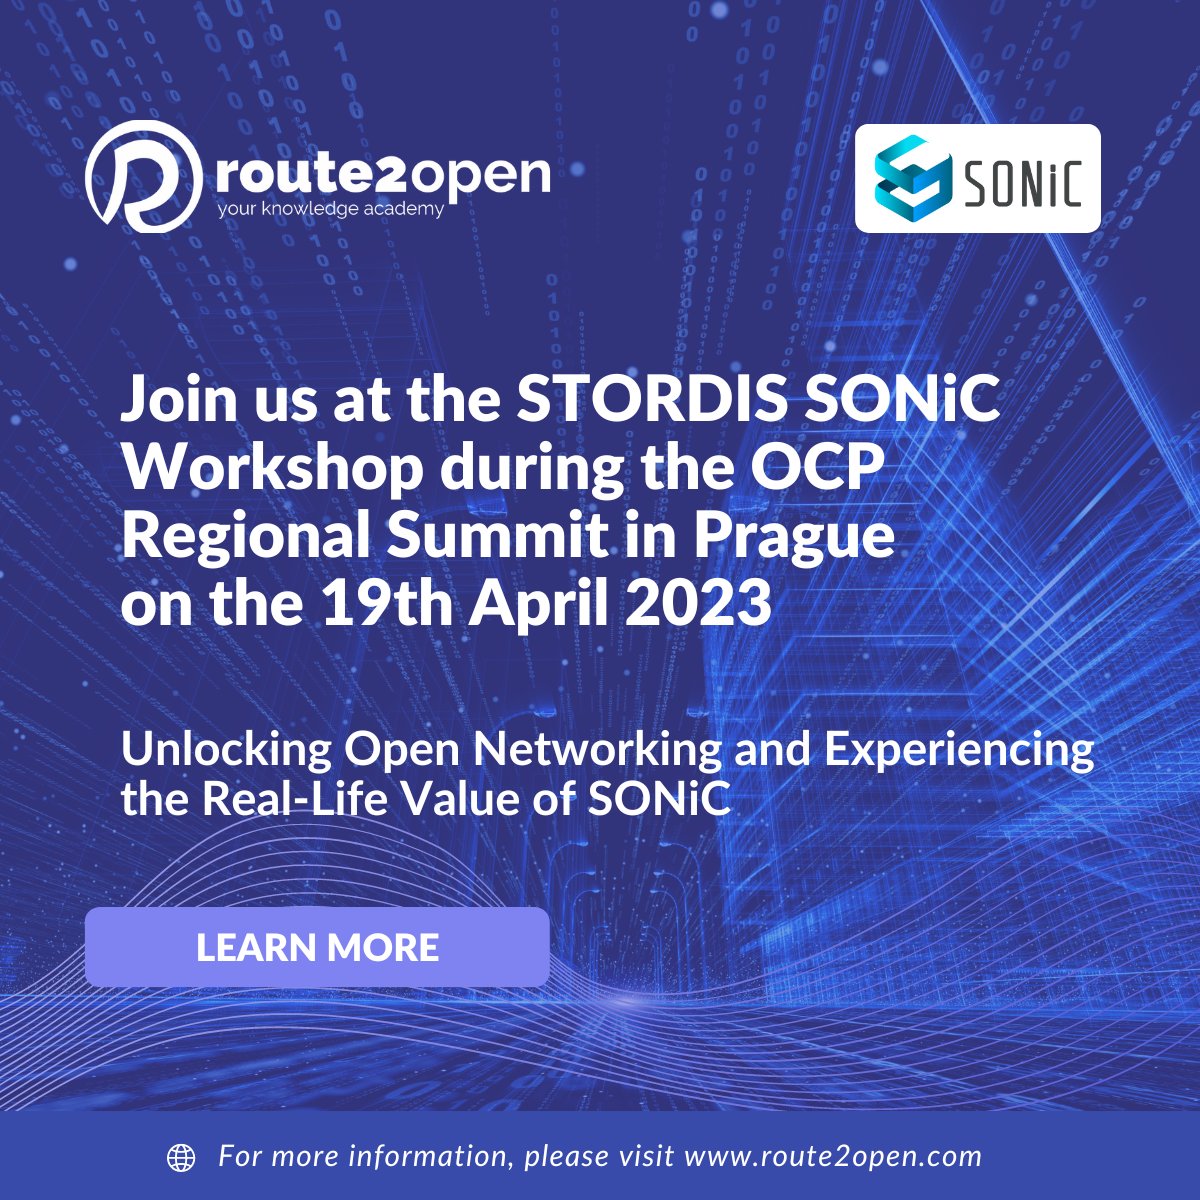 Discover how to unlock the power of Open Networking and #SONiC at the @STORDIS_GmbH workshop during the #OCPPrague23, on the 19th – 20th April 2023 in Prague! Meet us on Terrace 2B at 1:00 PM #OpenNetworking #LetsTalkSONiC lnkd.in/duYu9hrk